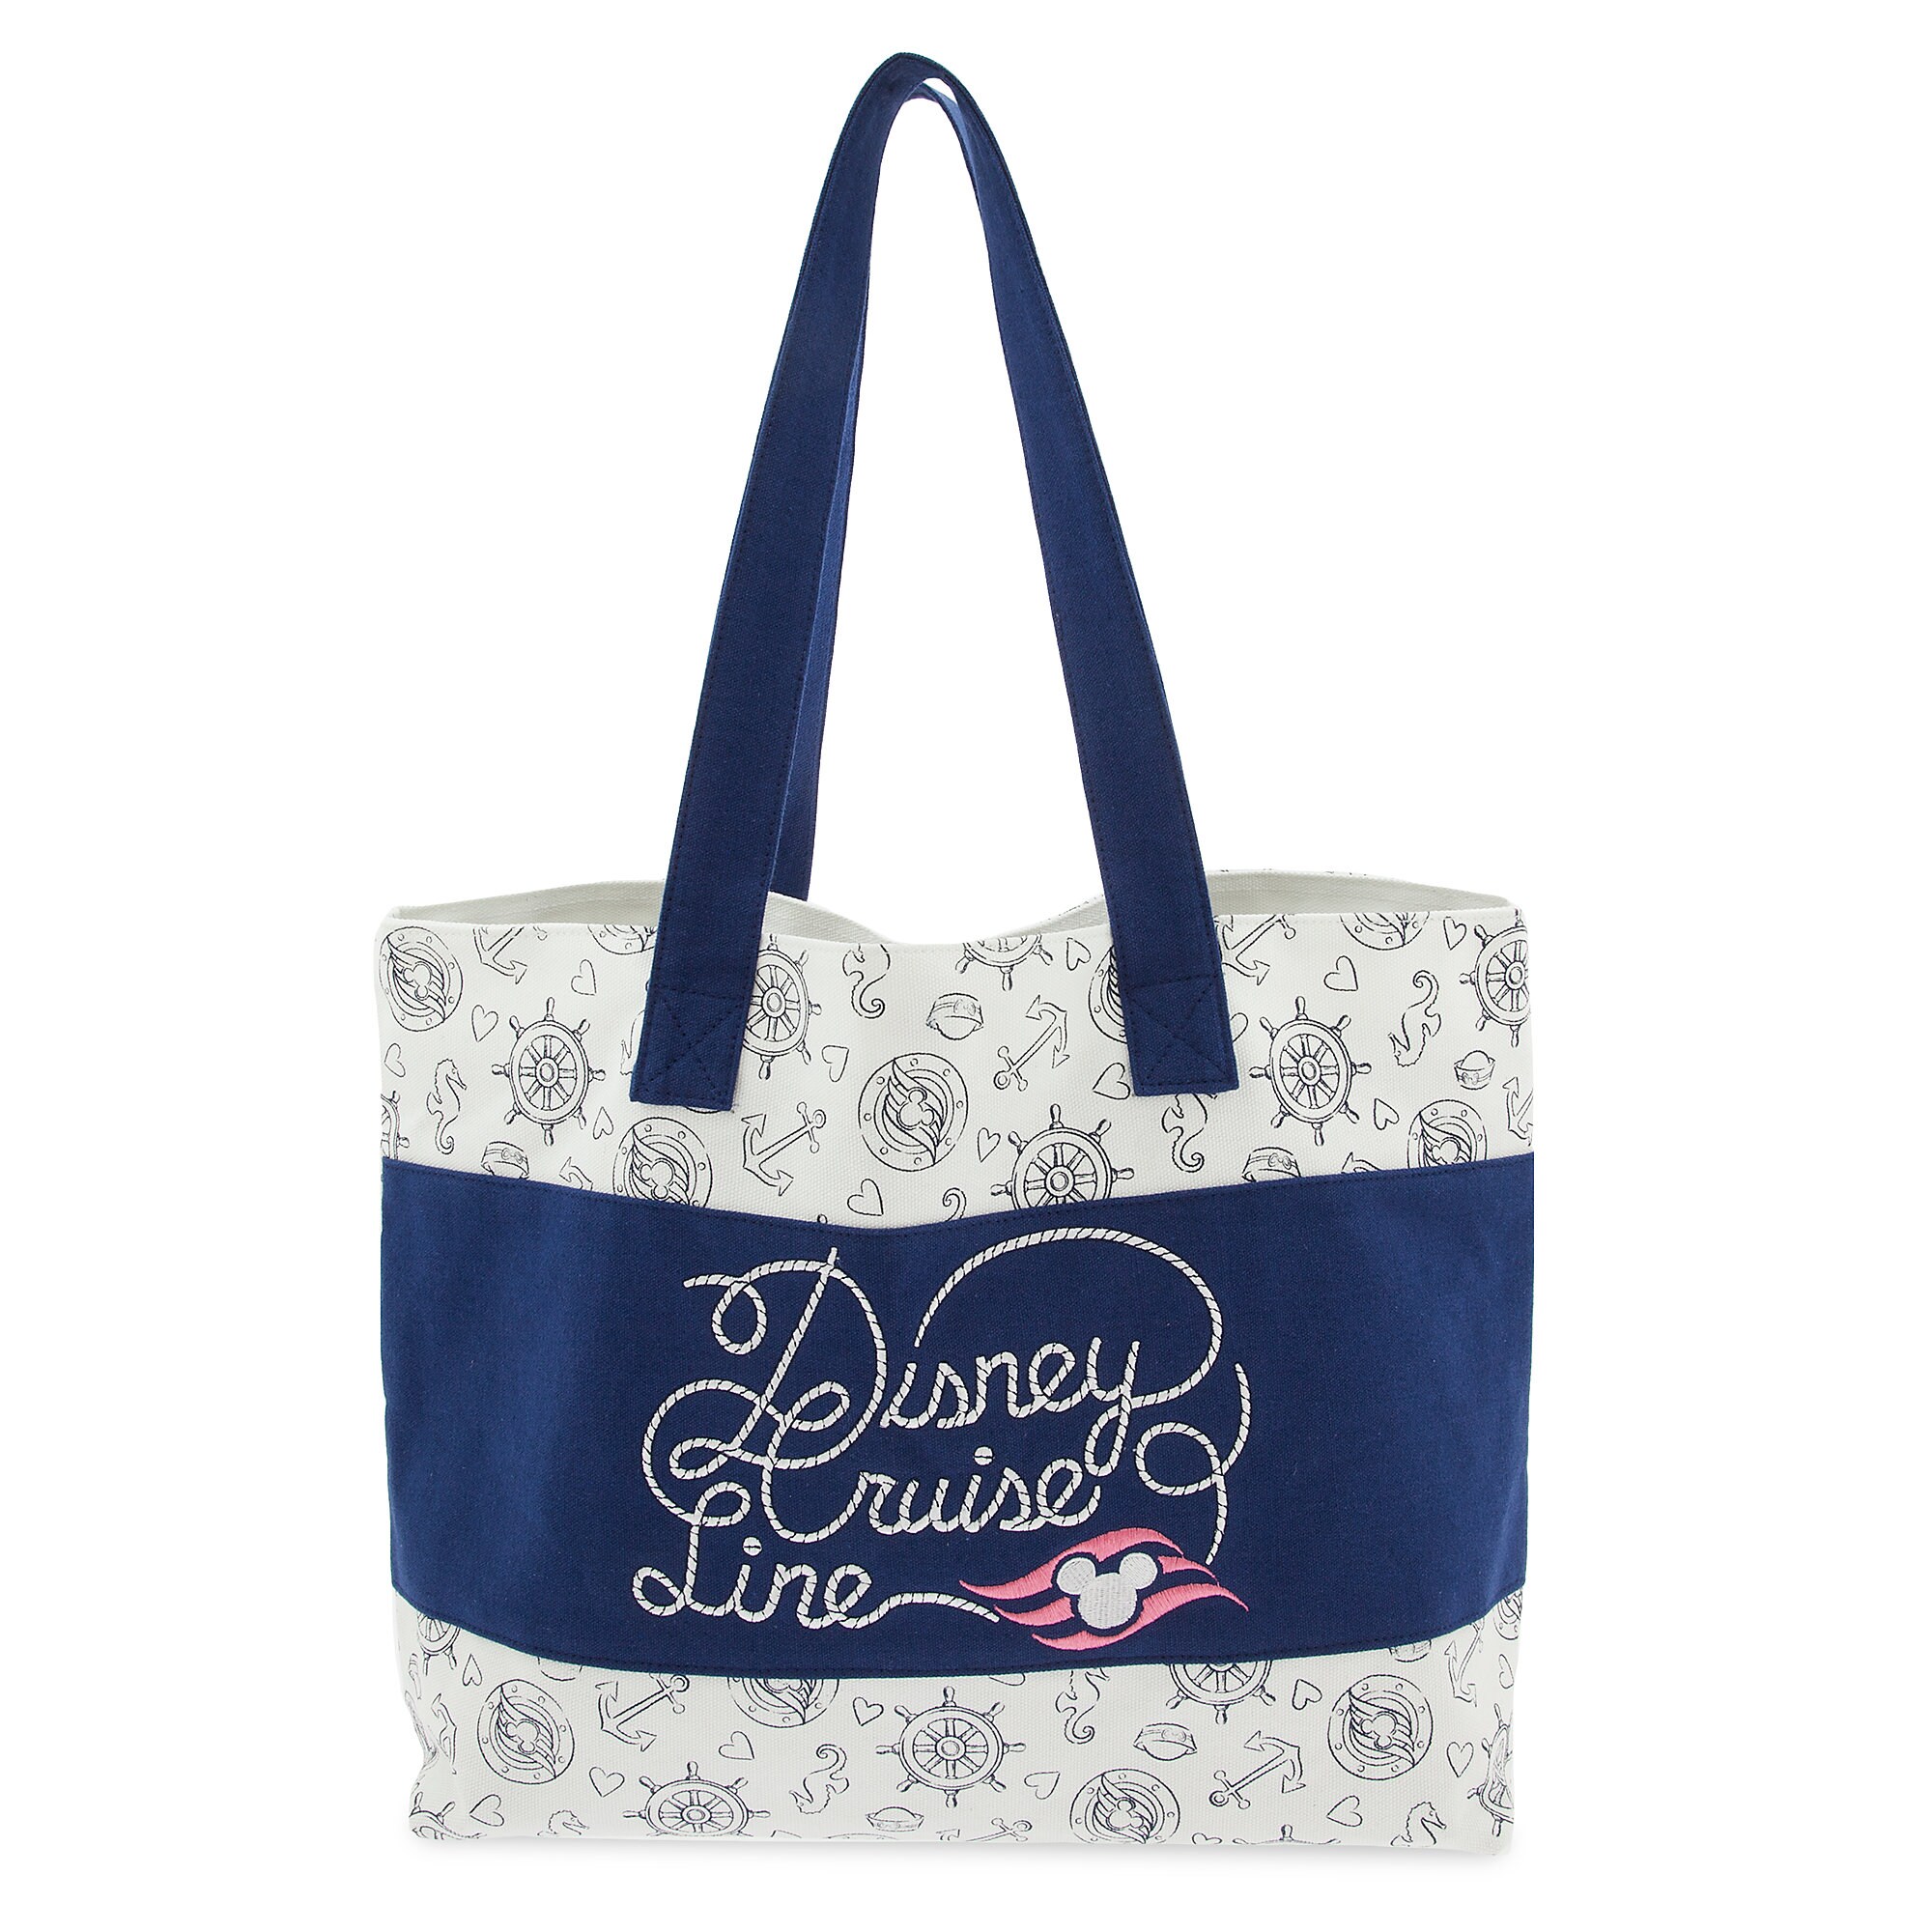 Minnie Mouse Tote Bag - Disney Cruise Line